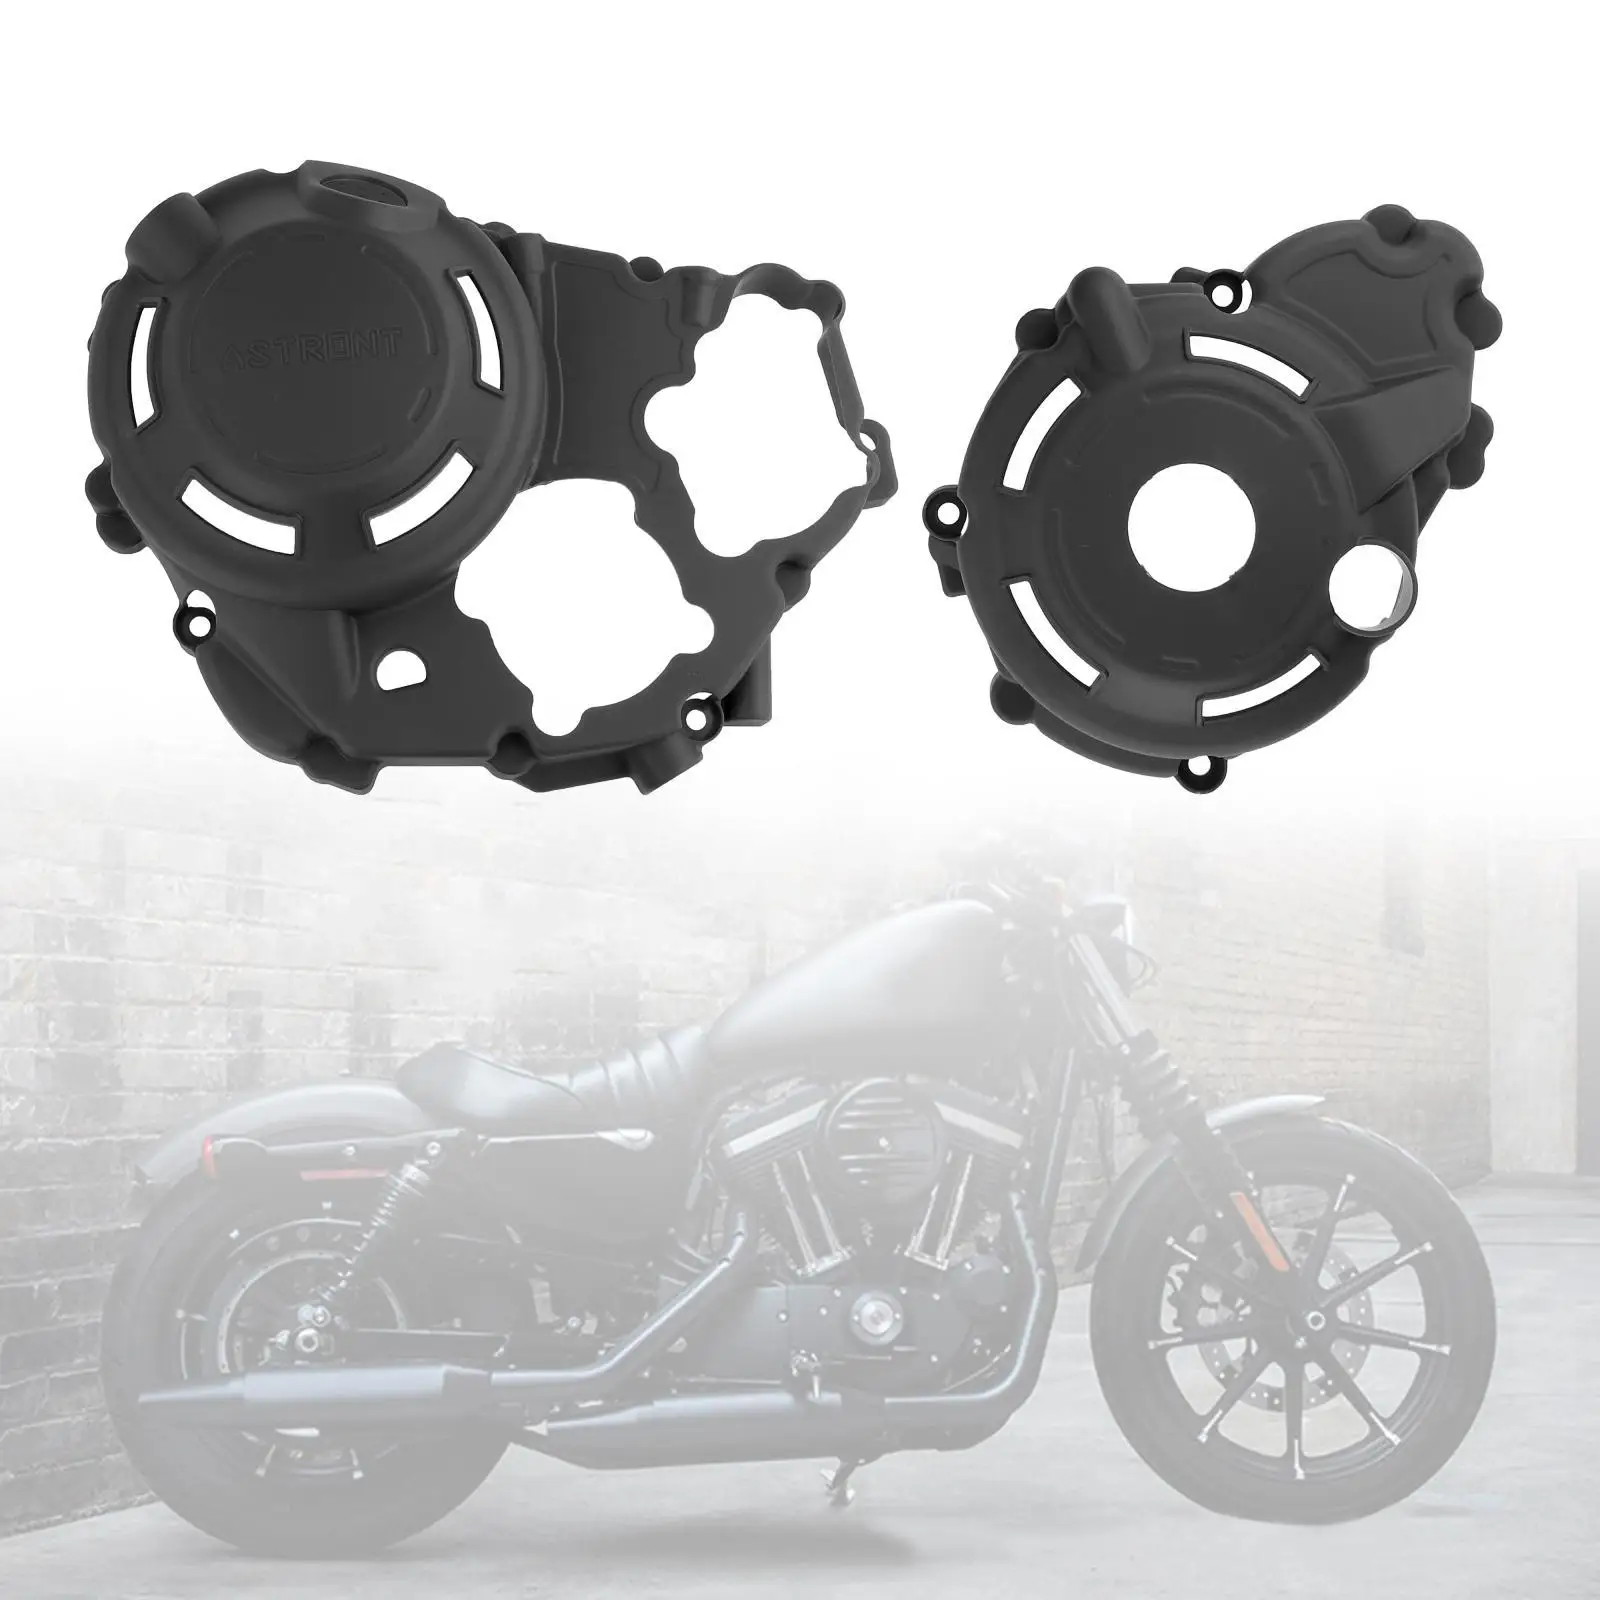 Motorcycle Engine  Cover , Anti-Scratch ,Direct Replaces High Performance Engine Parts Guard Case Fits  Crf250L